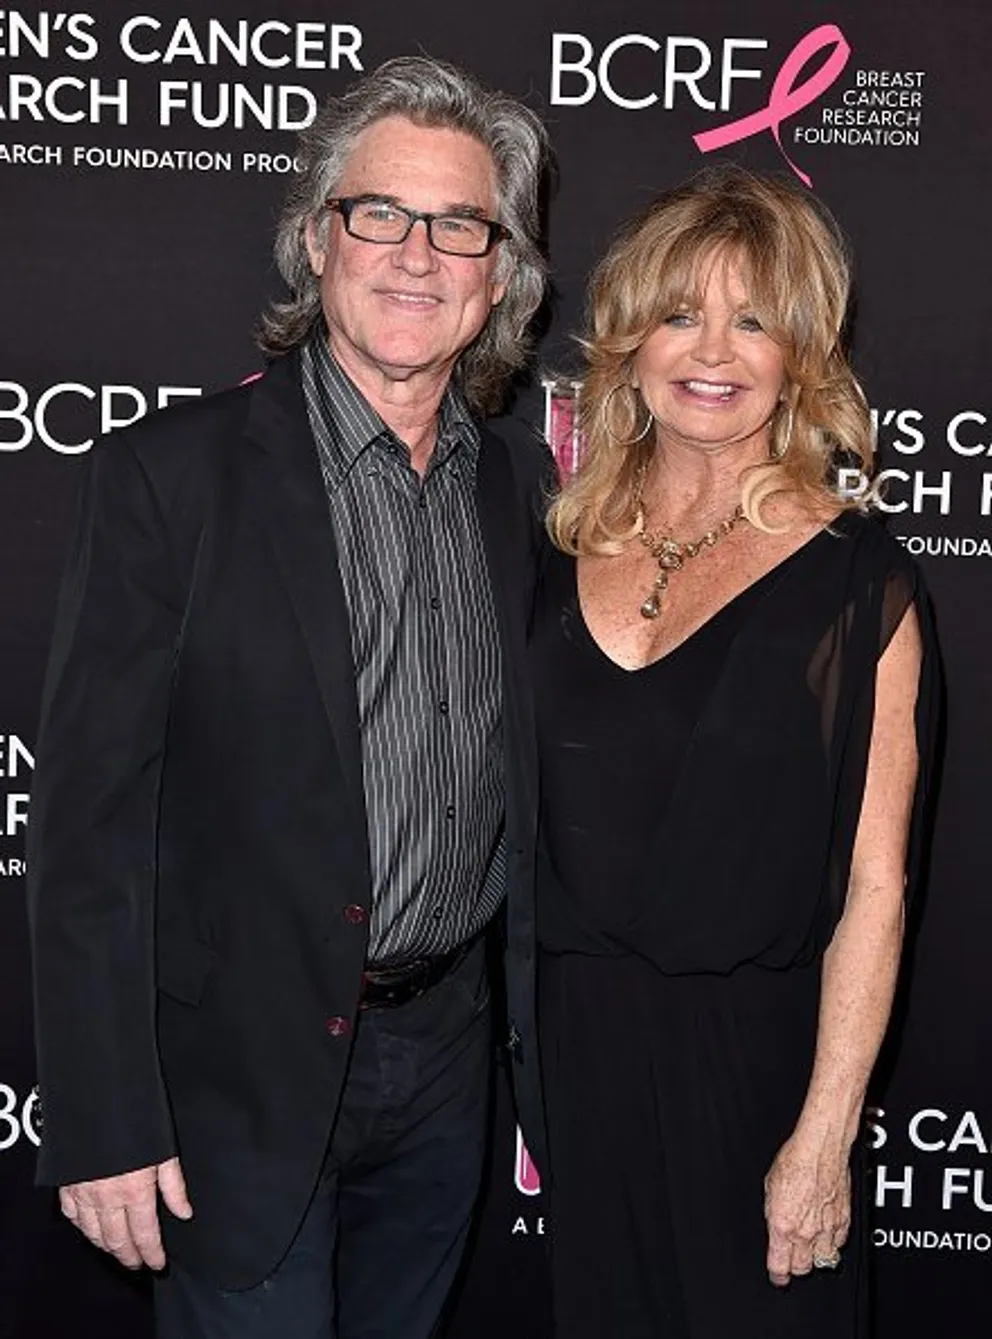 Kurt Russell and Goldie Hawn at the Beverly Wilshire Four Seasons Hotel on February 28, 2019 in Beverly Hills, California. | Photo: Getty Images